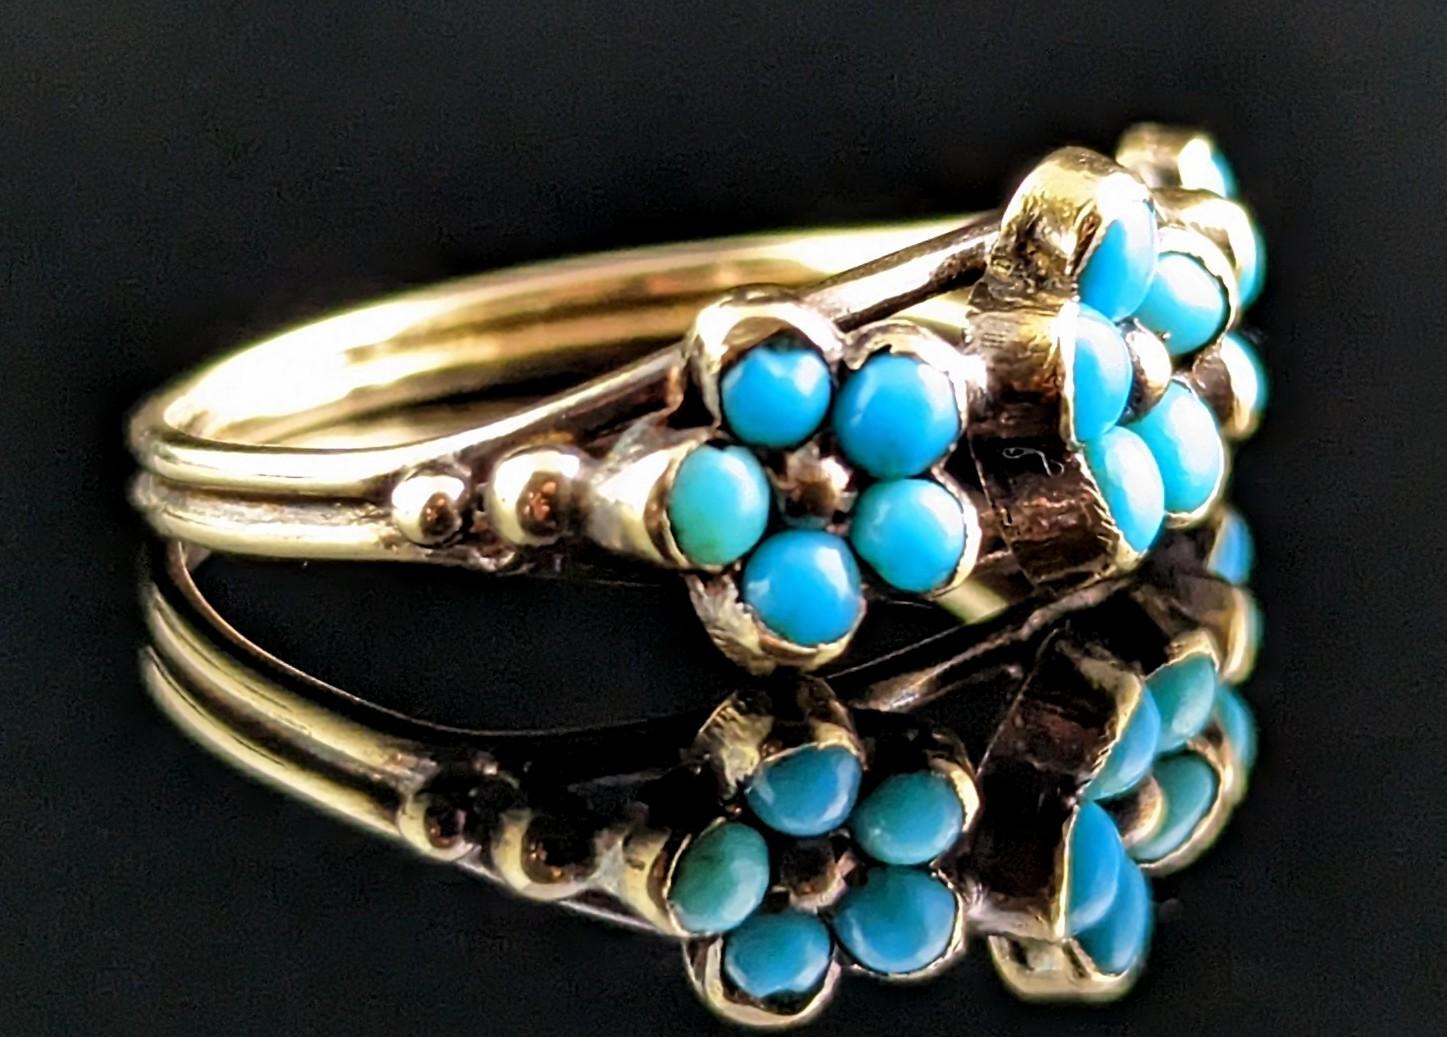 Antique Georgian Triple Flower Ring, Forget Me Not, 18k Gold and Turquoise 1